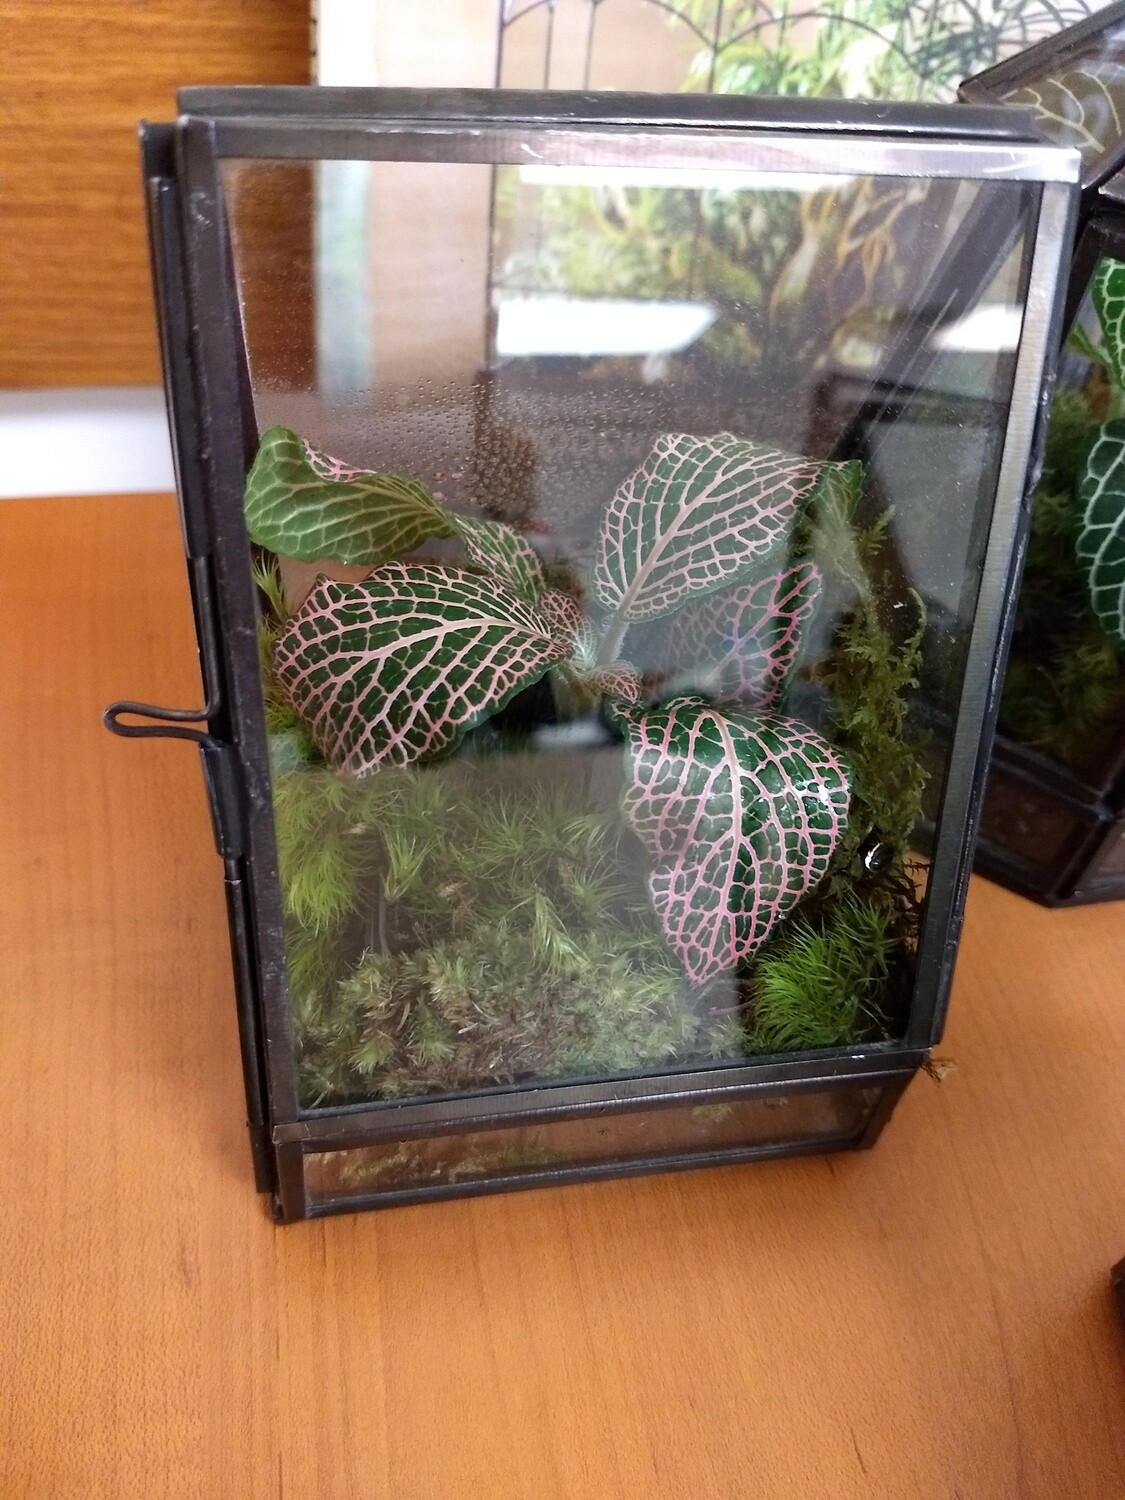 Learn to Create Terrarium with Mosses - Your Own Desktop Lesson